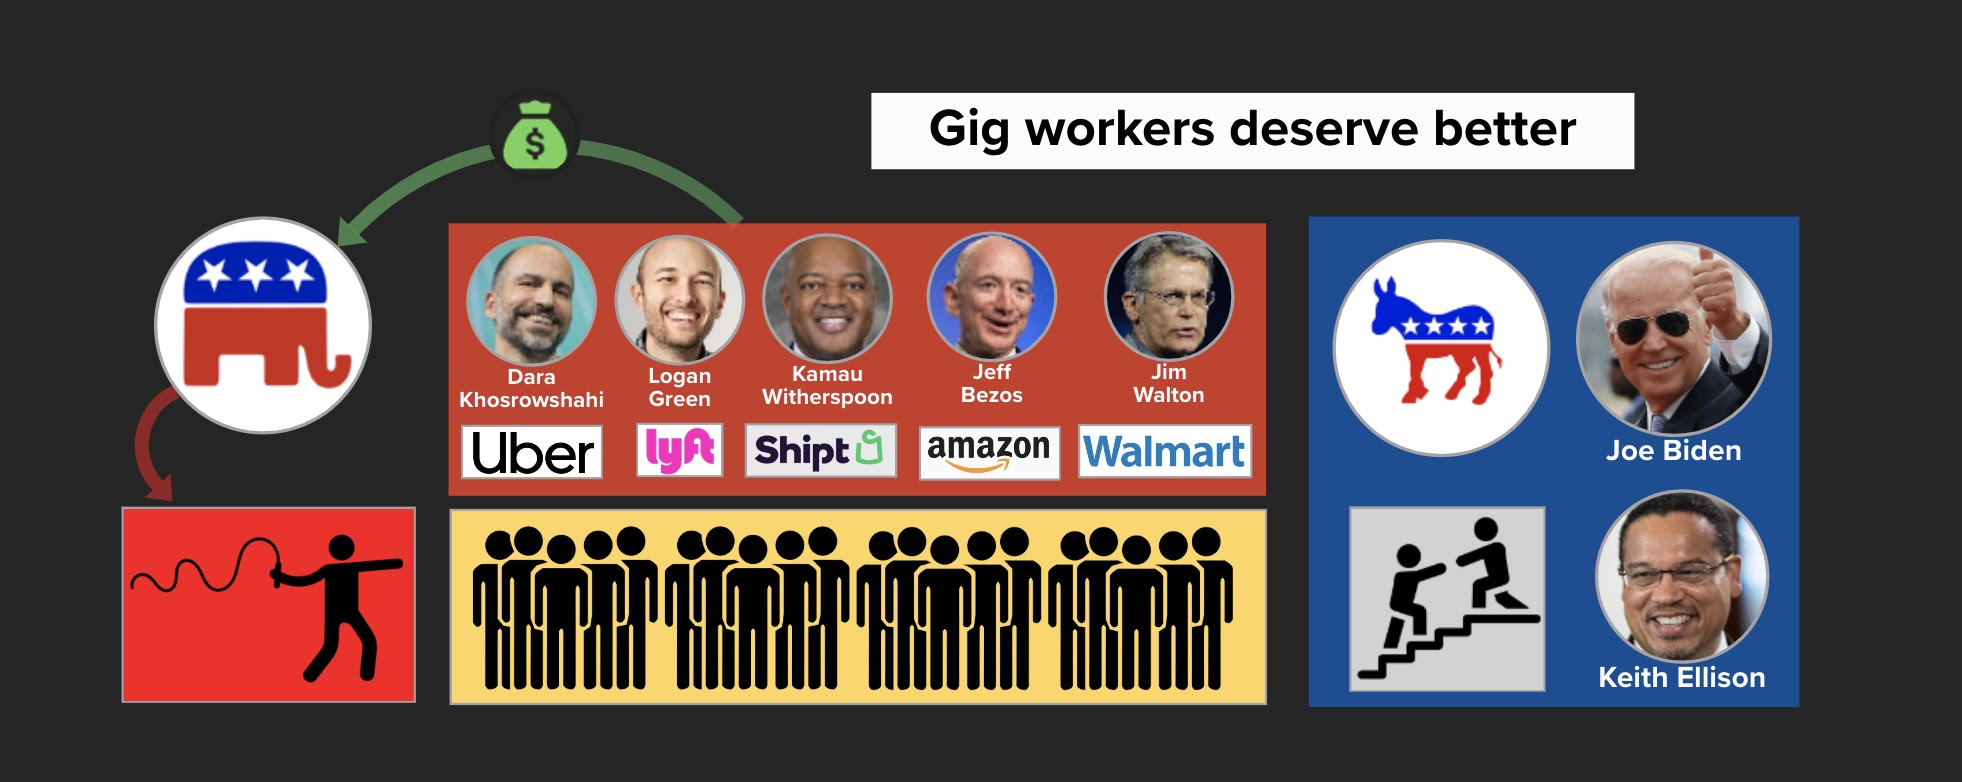 Gig workers deserve better. A living wage and the right to organize.